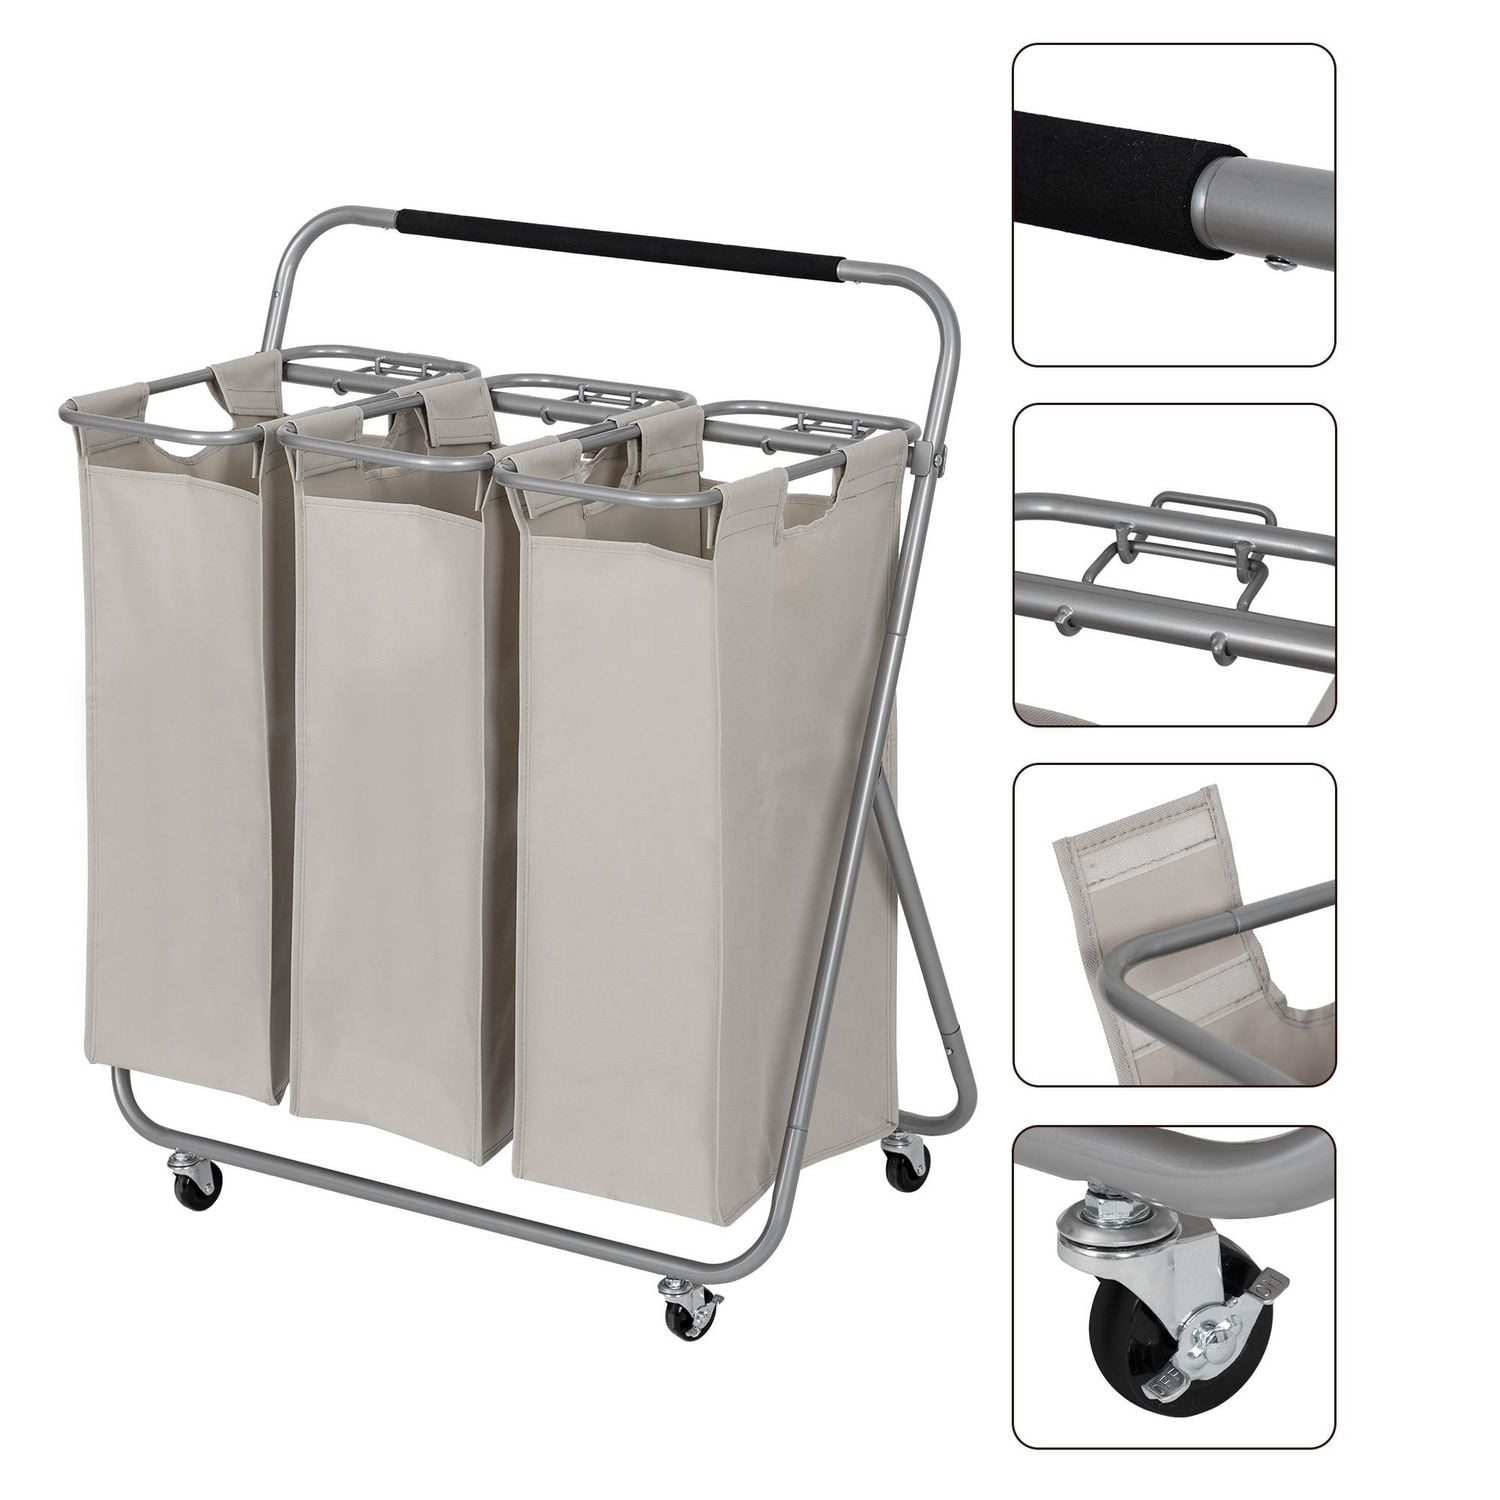 Save on Whitmor Pop And Fold Laundry Sorter Order Online Delivery